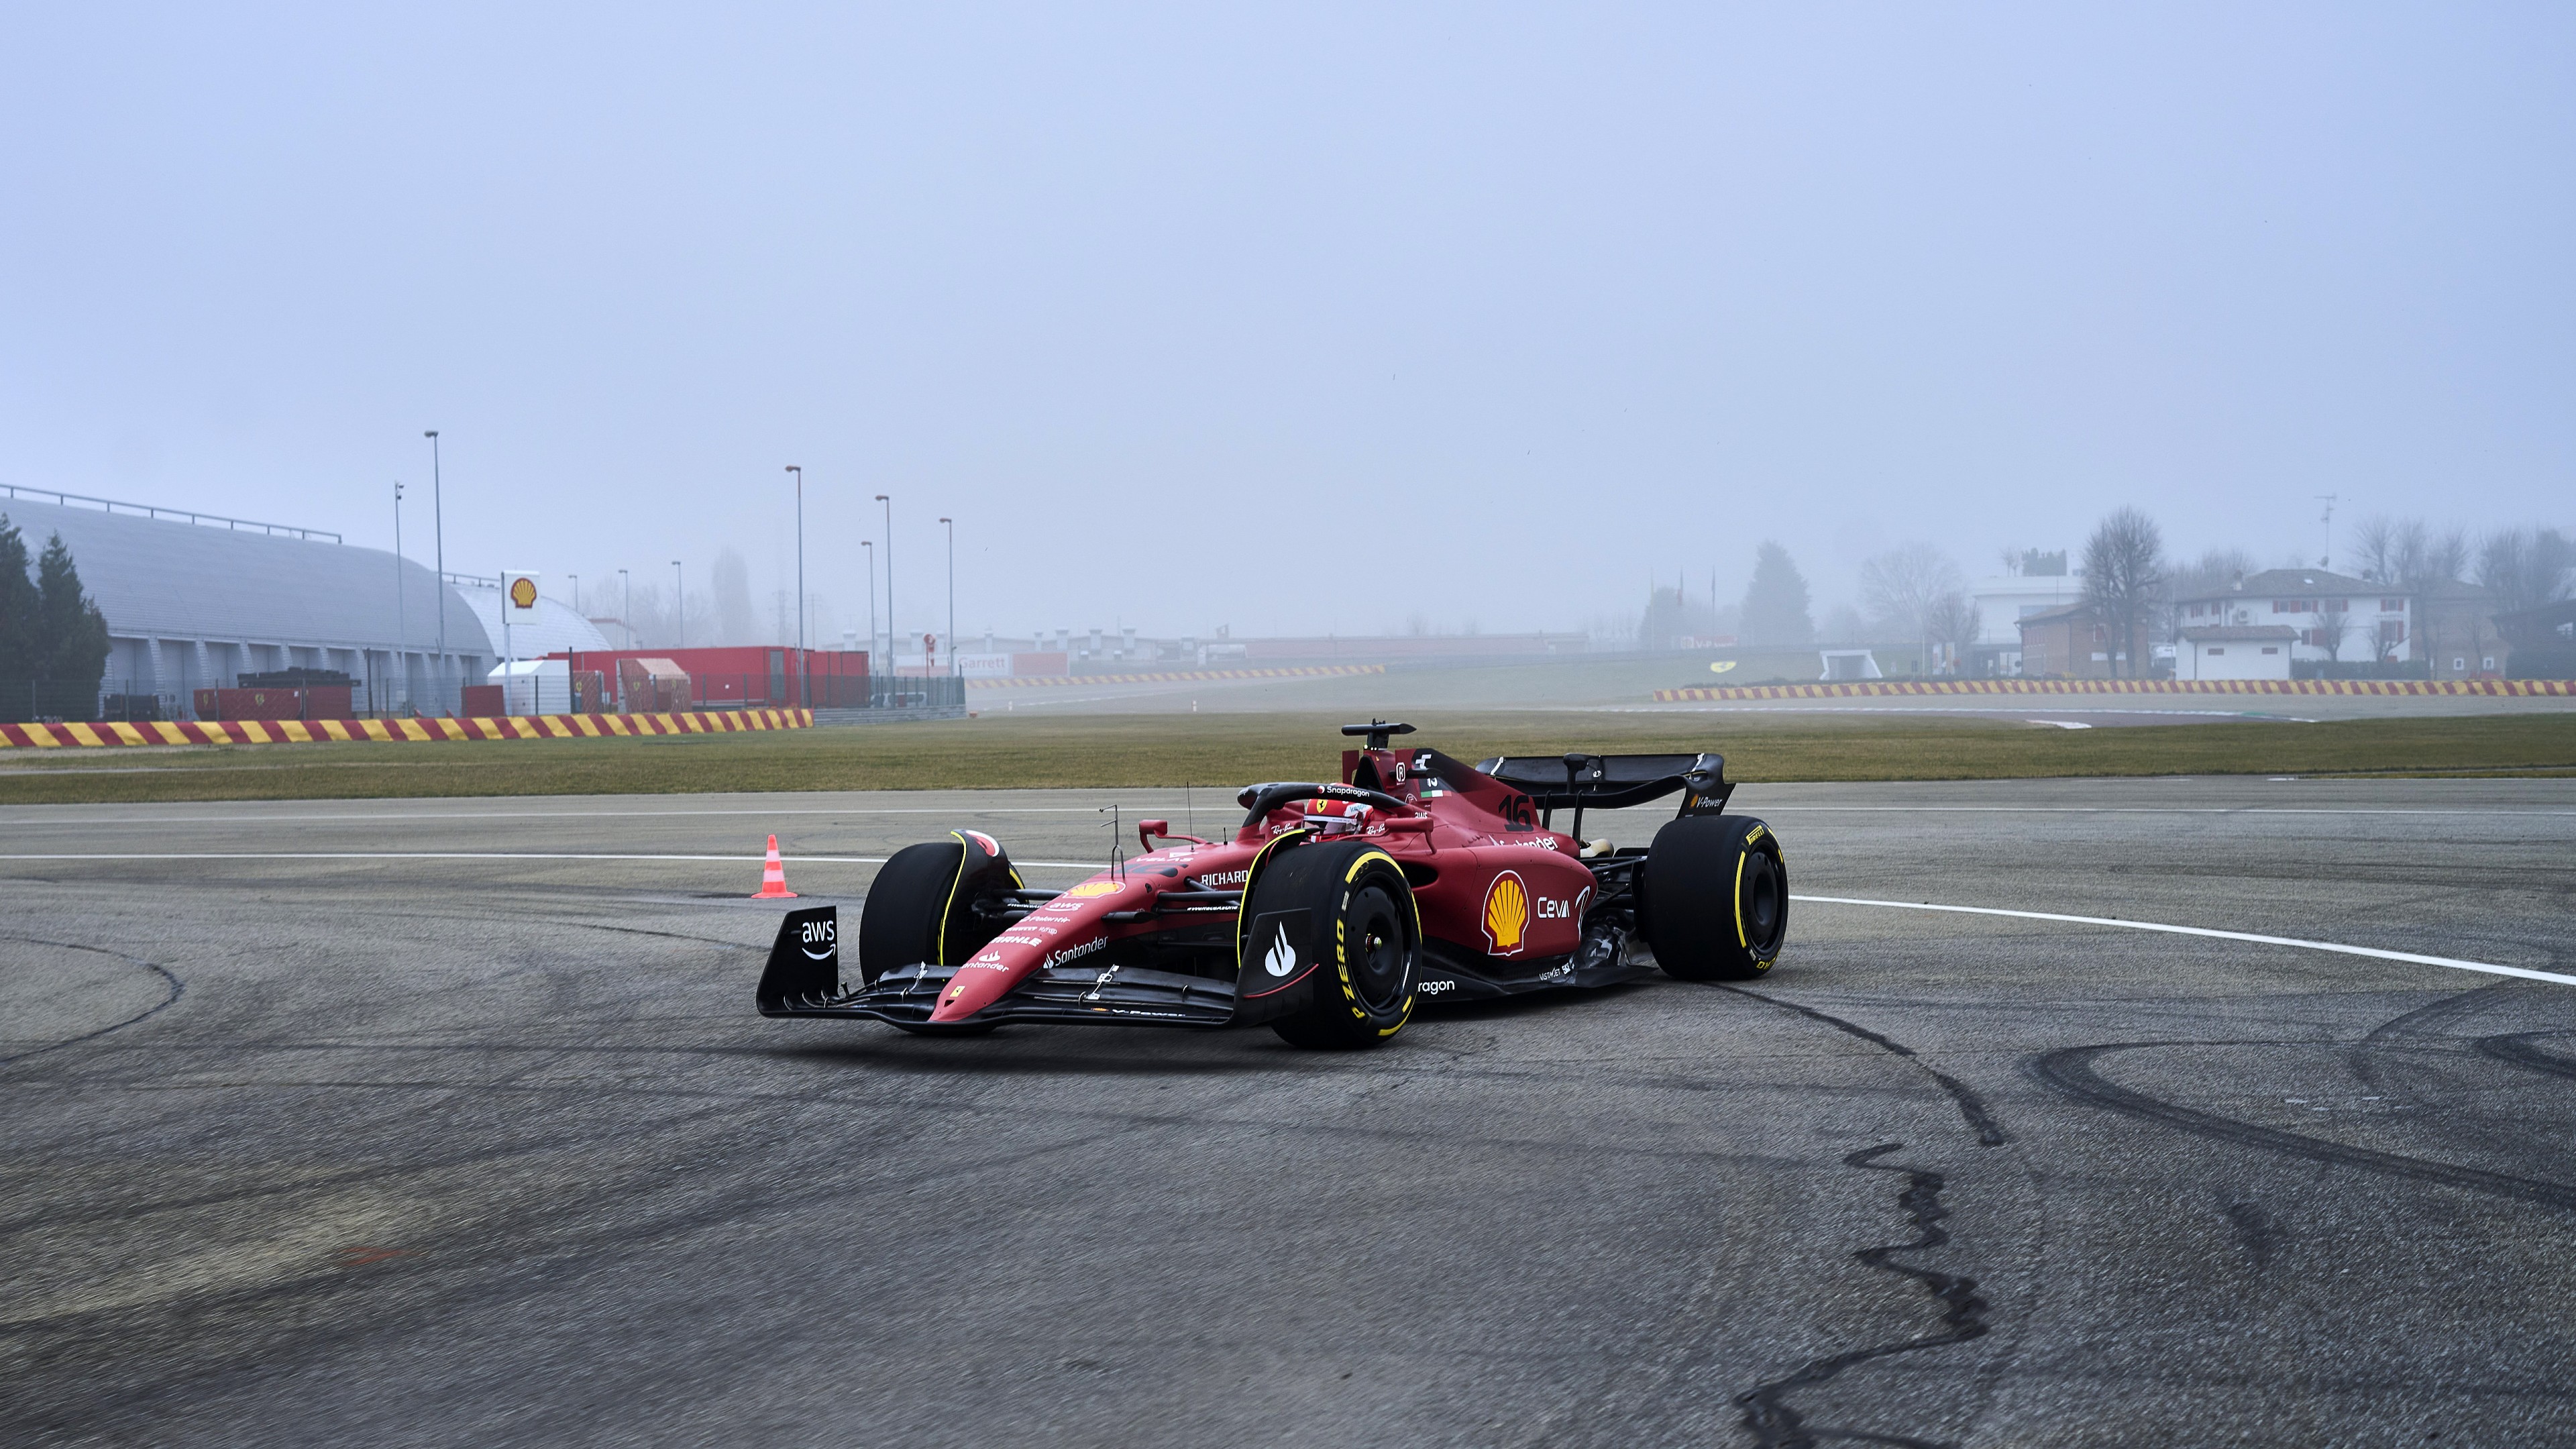 Download this Ferrari F1 75 wallpaper now and show your love for racing 3840x2160